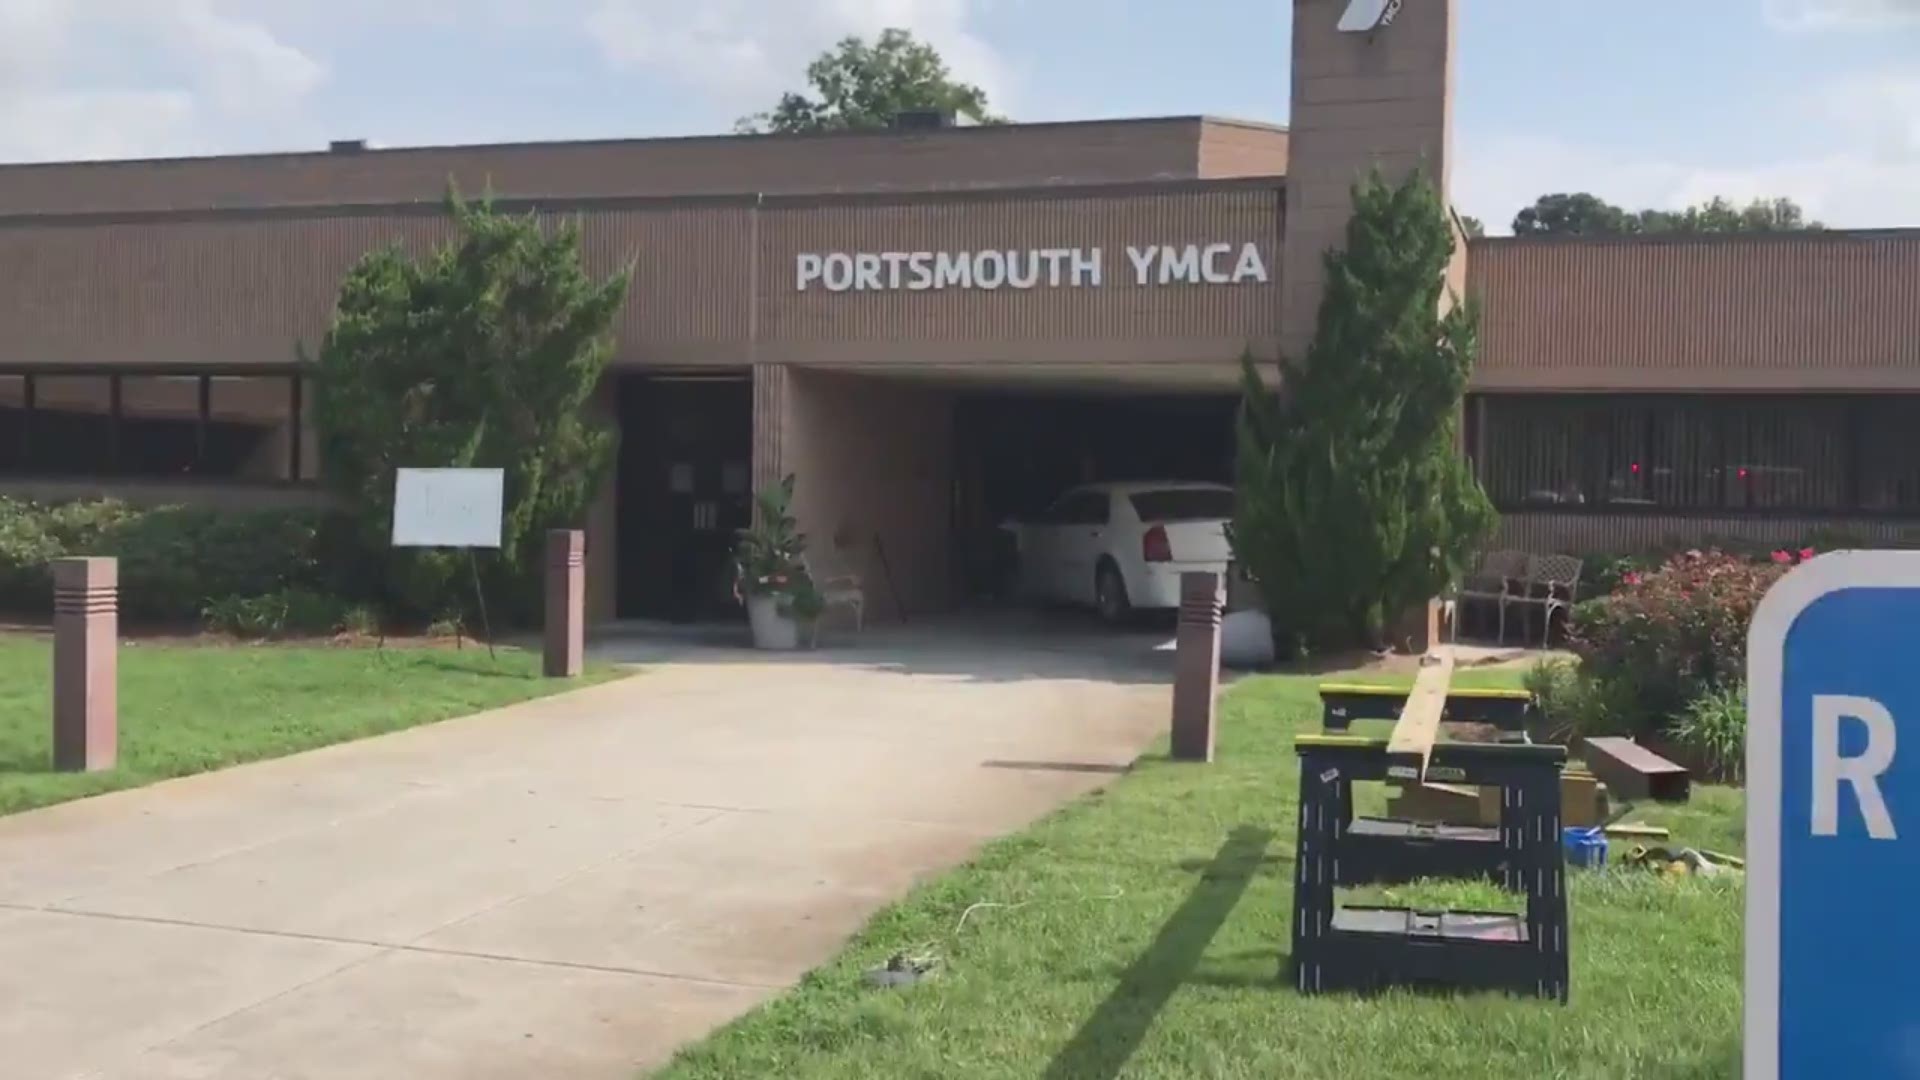 A car went into the lobby of the Portsmouth YMCA in Churchland on September 17, 2019. Several people were hurt.